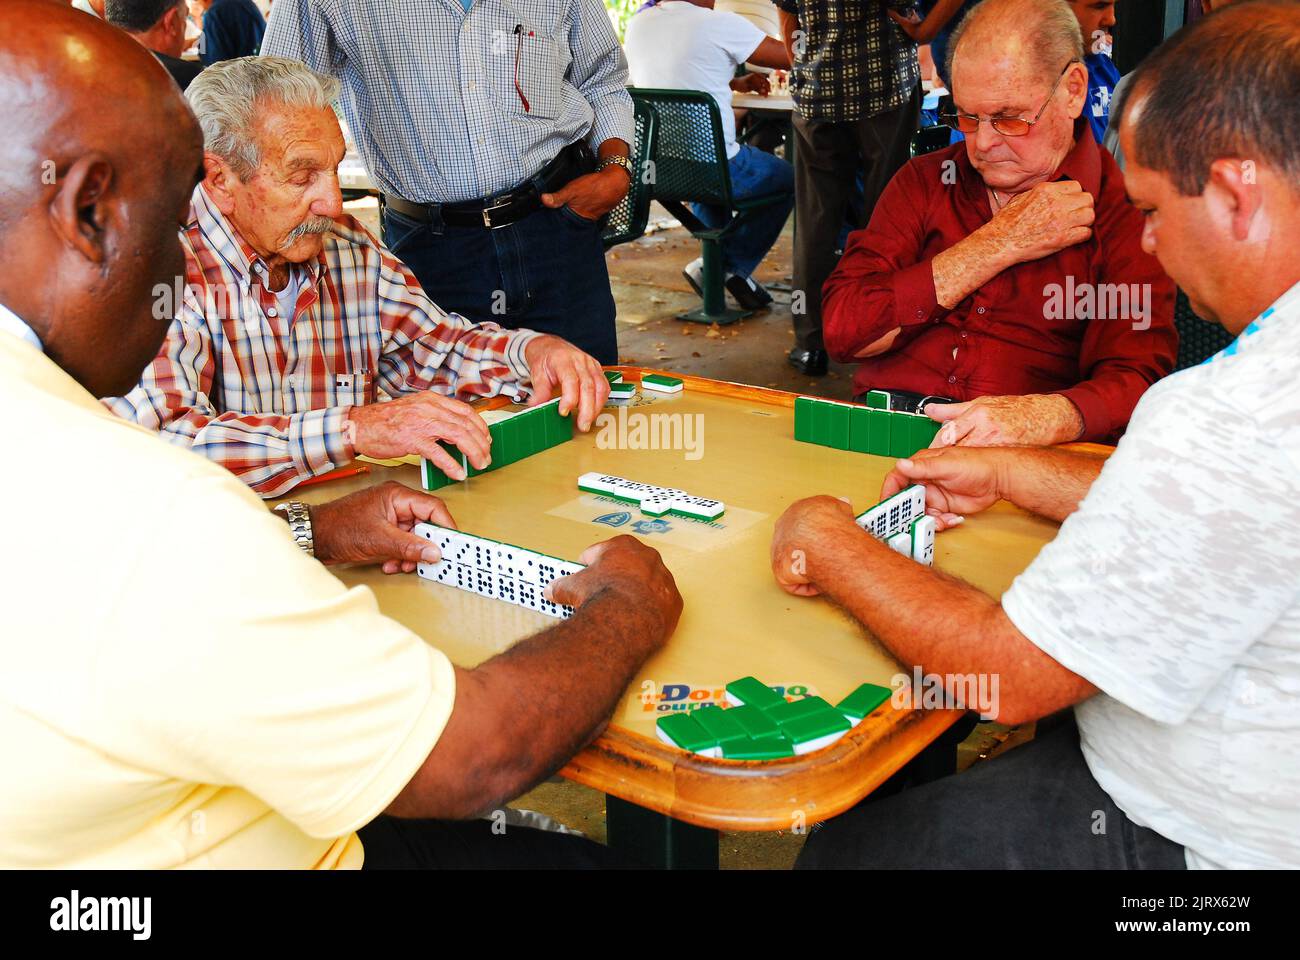 A group of senior men play a friendly game of dominos at a park in the Calle Ocho Cuban neighborhood of Miami Florida Stock Photo